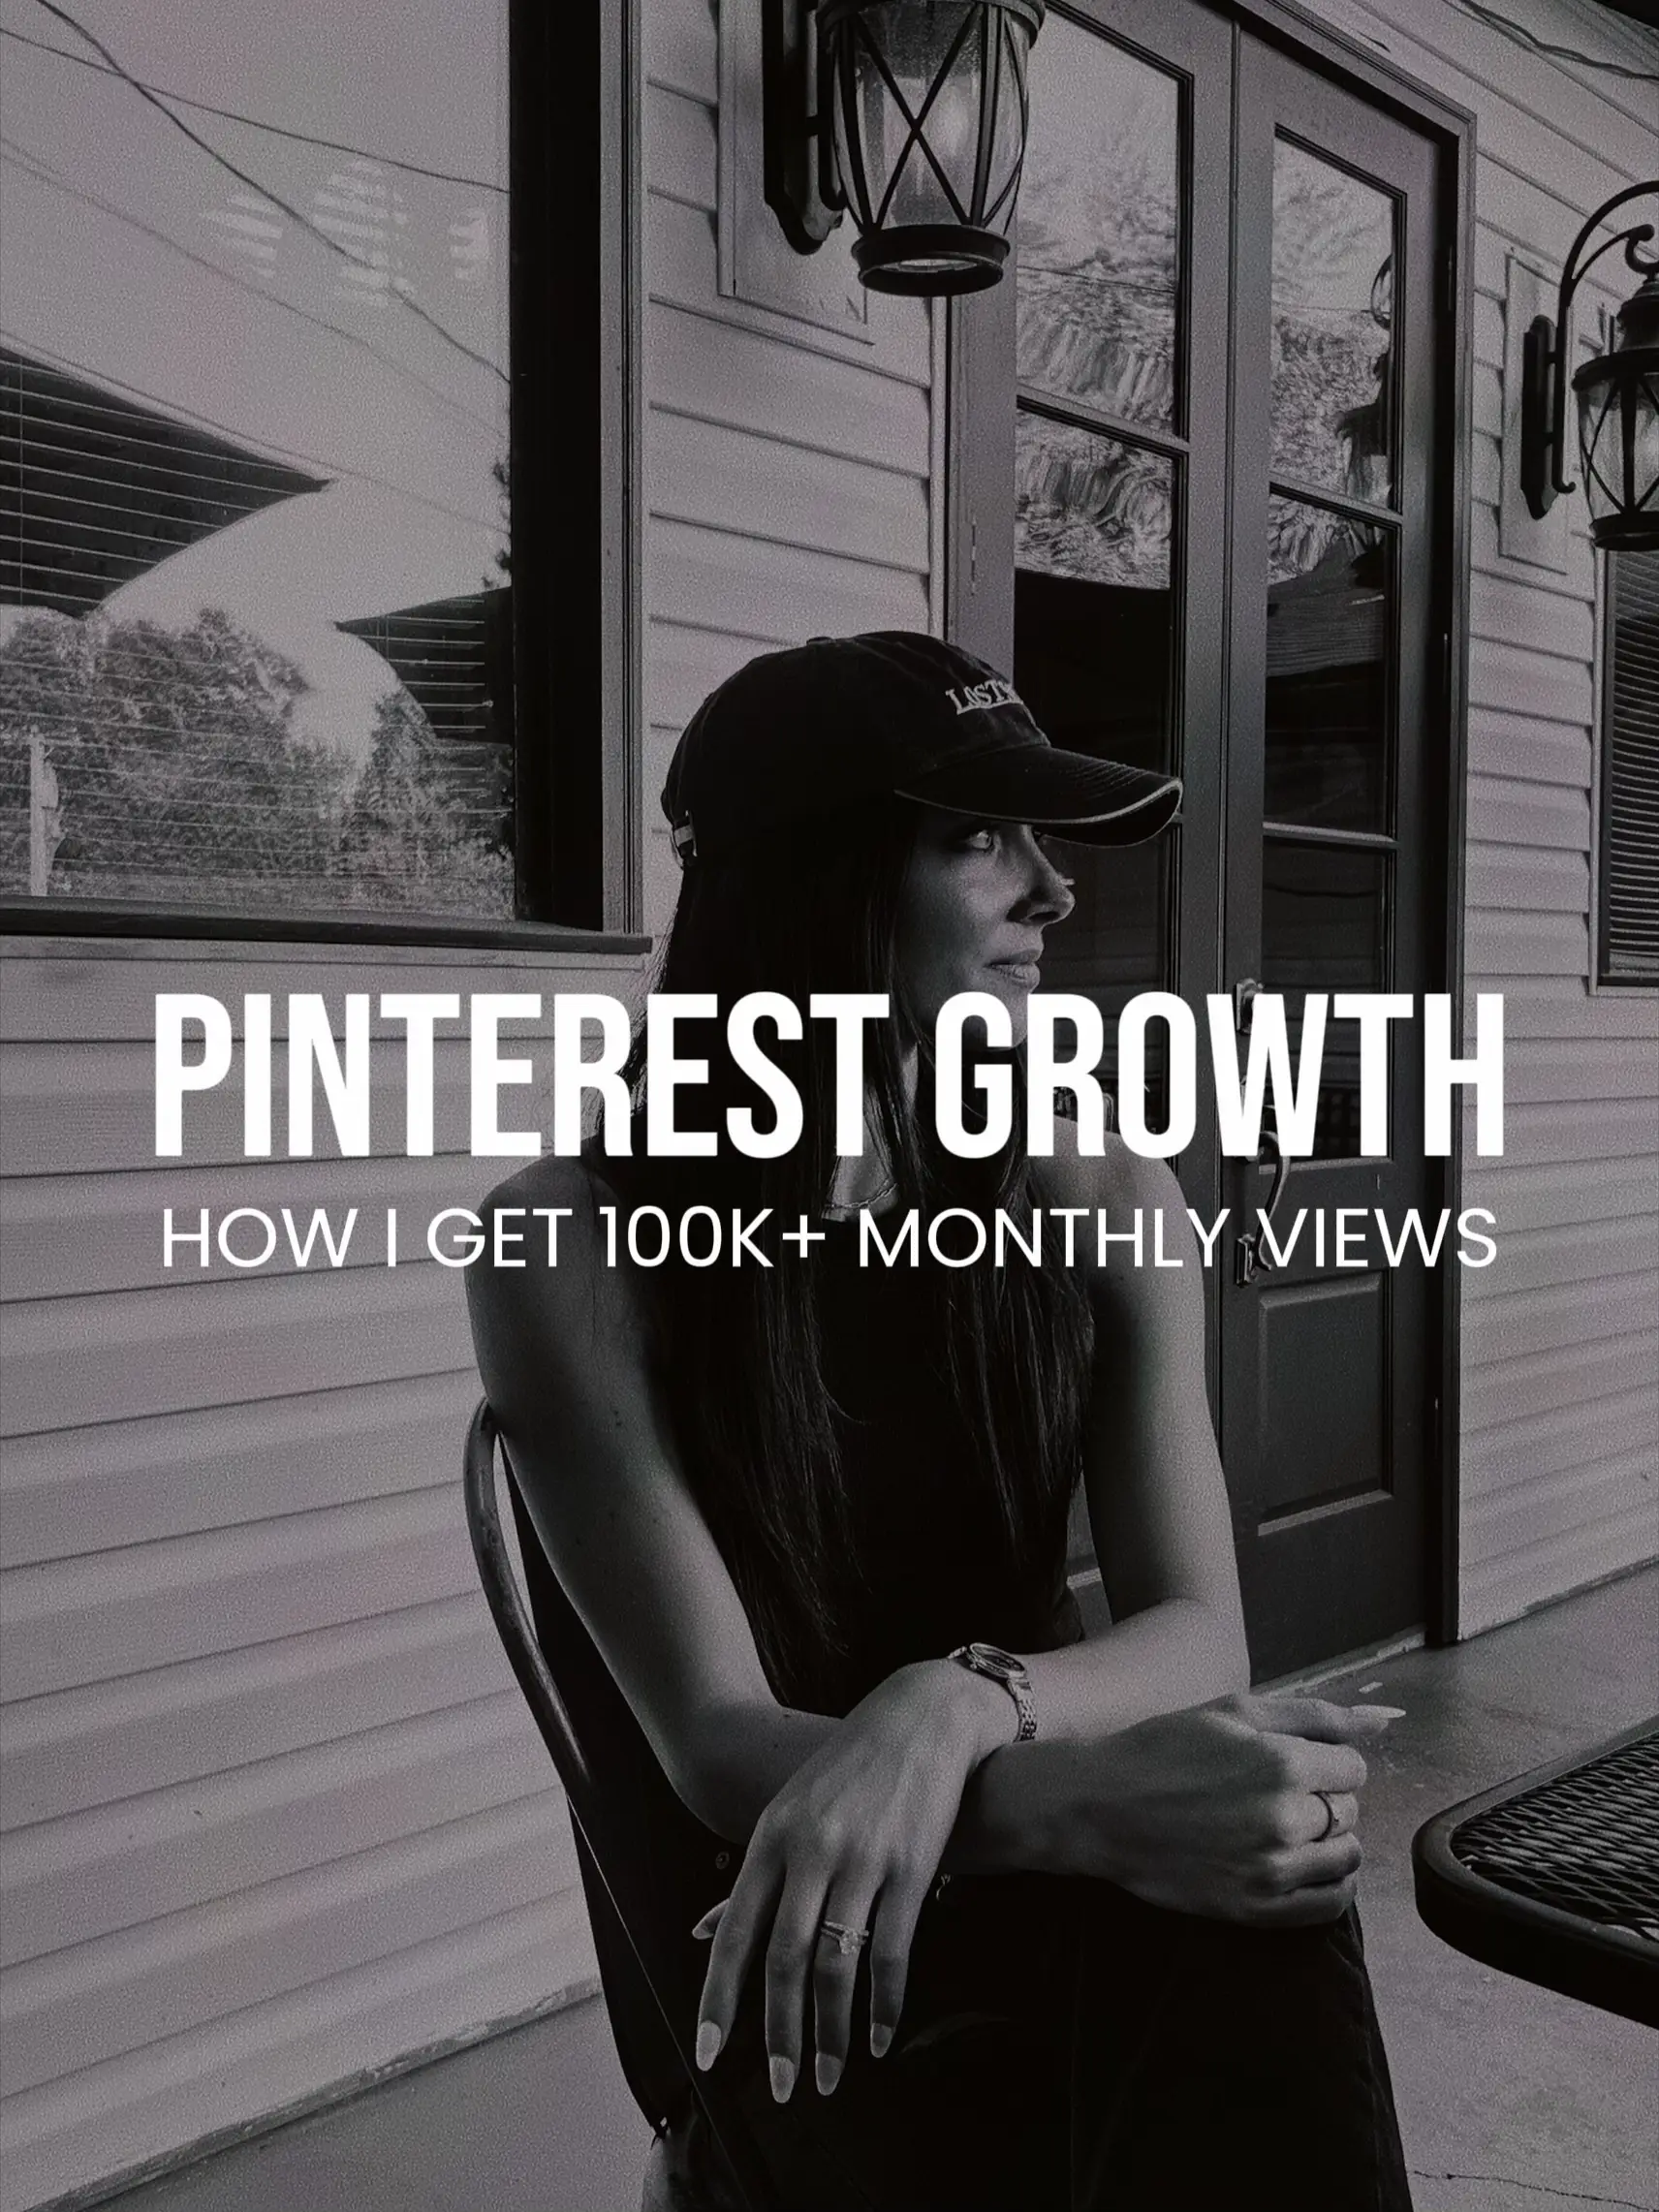 HOW I GET 100K+ MONTHLY VIEWS ON PINTEREST's images